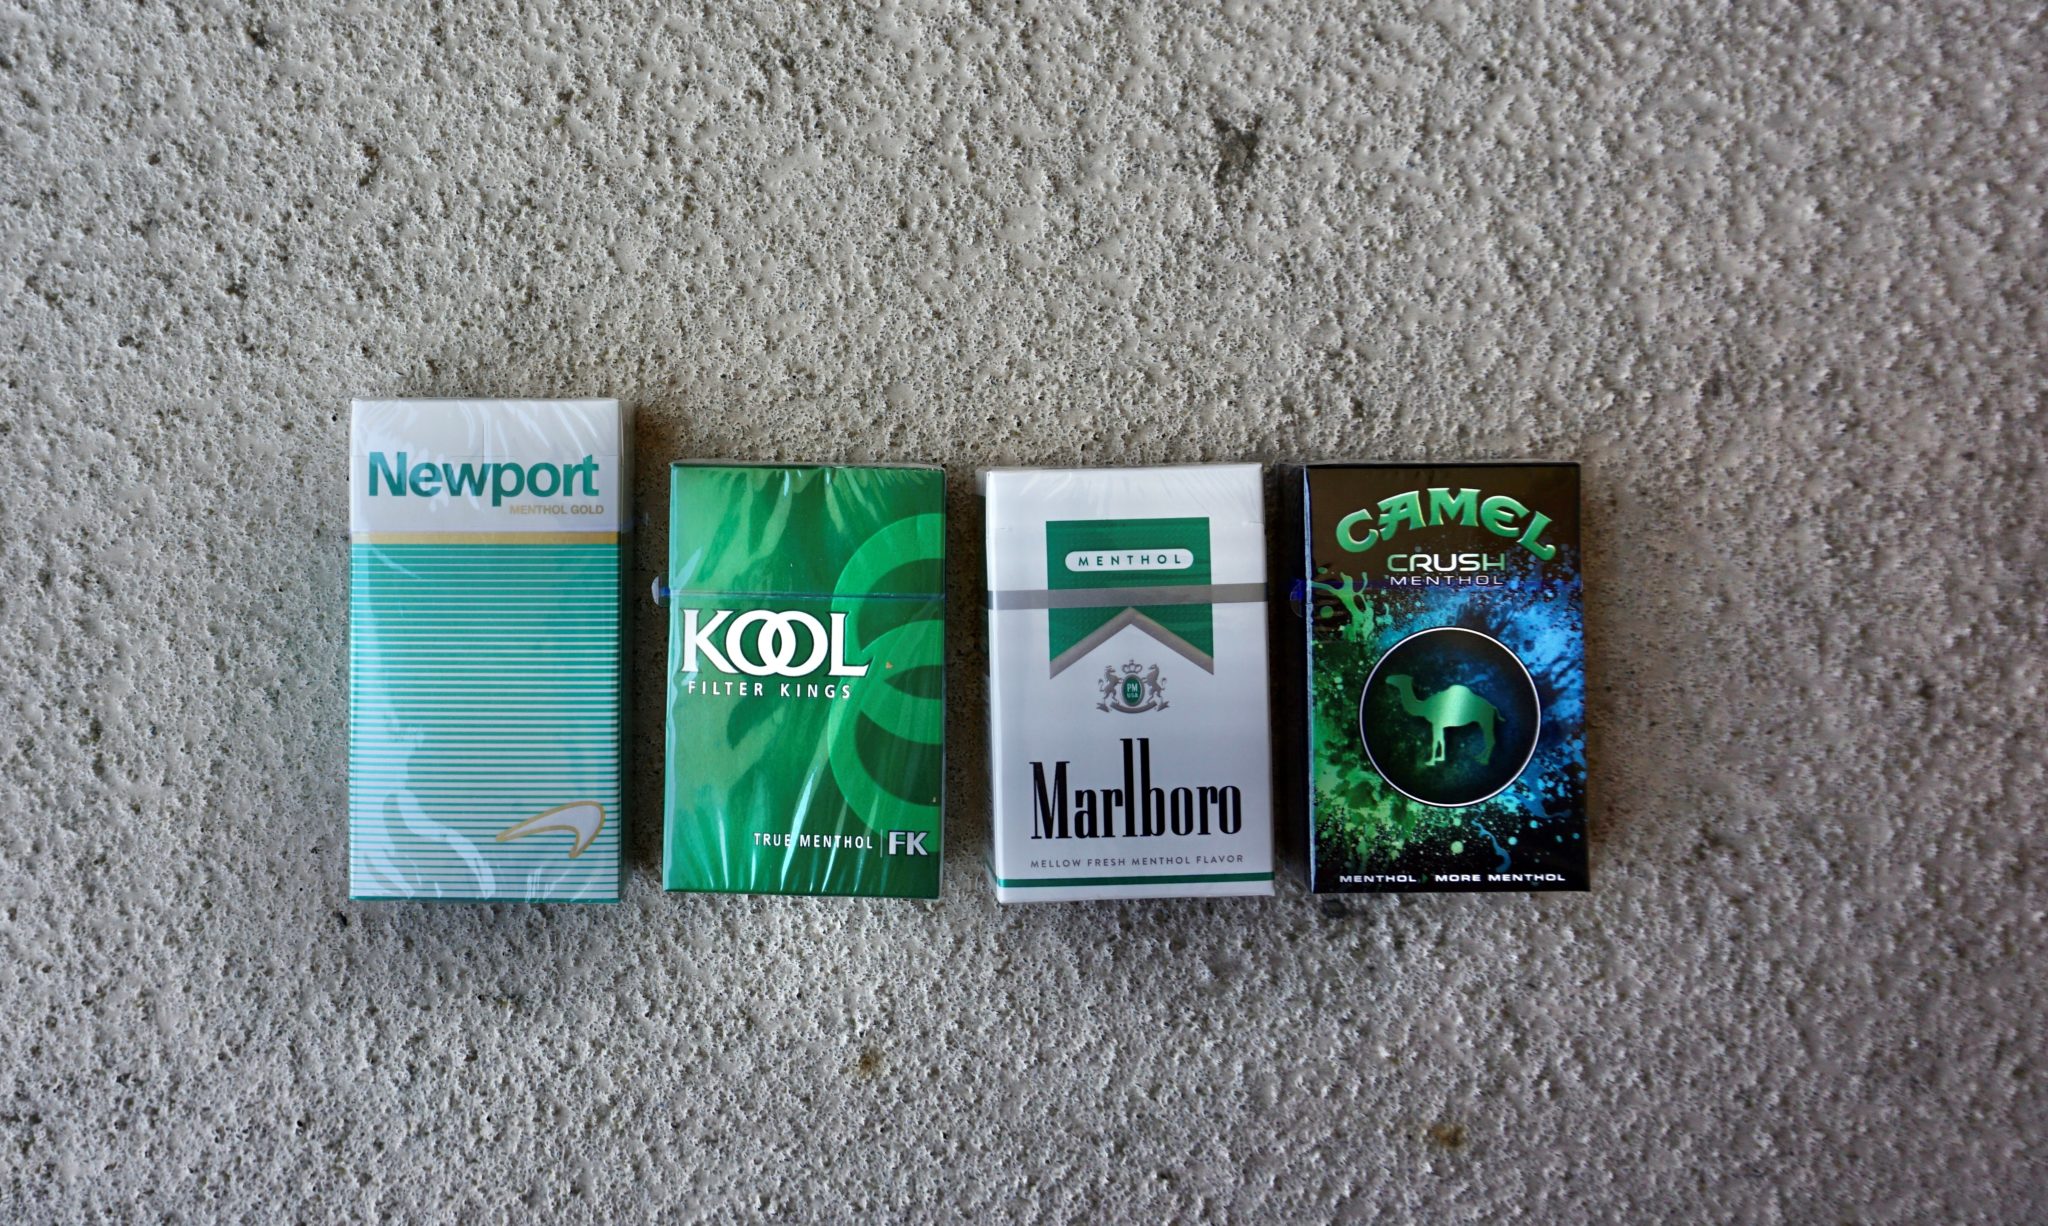 Joint Statement The FDA Agrees to Ban Menthol, To Protect African